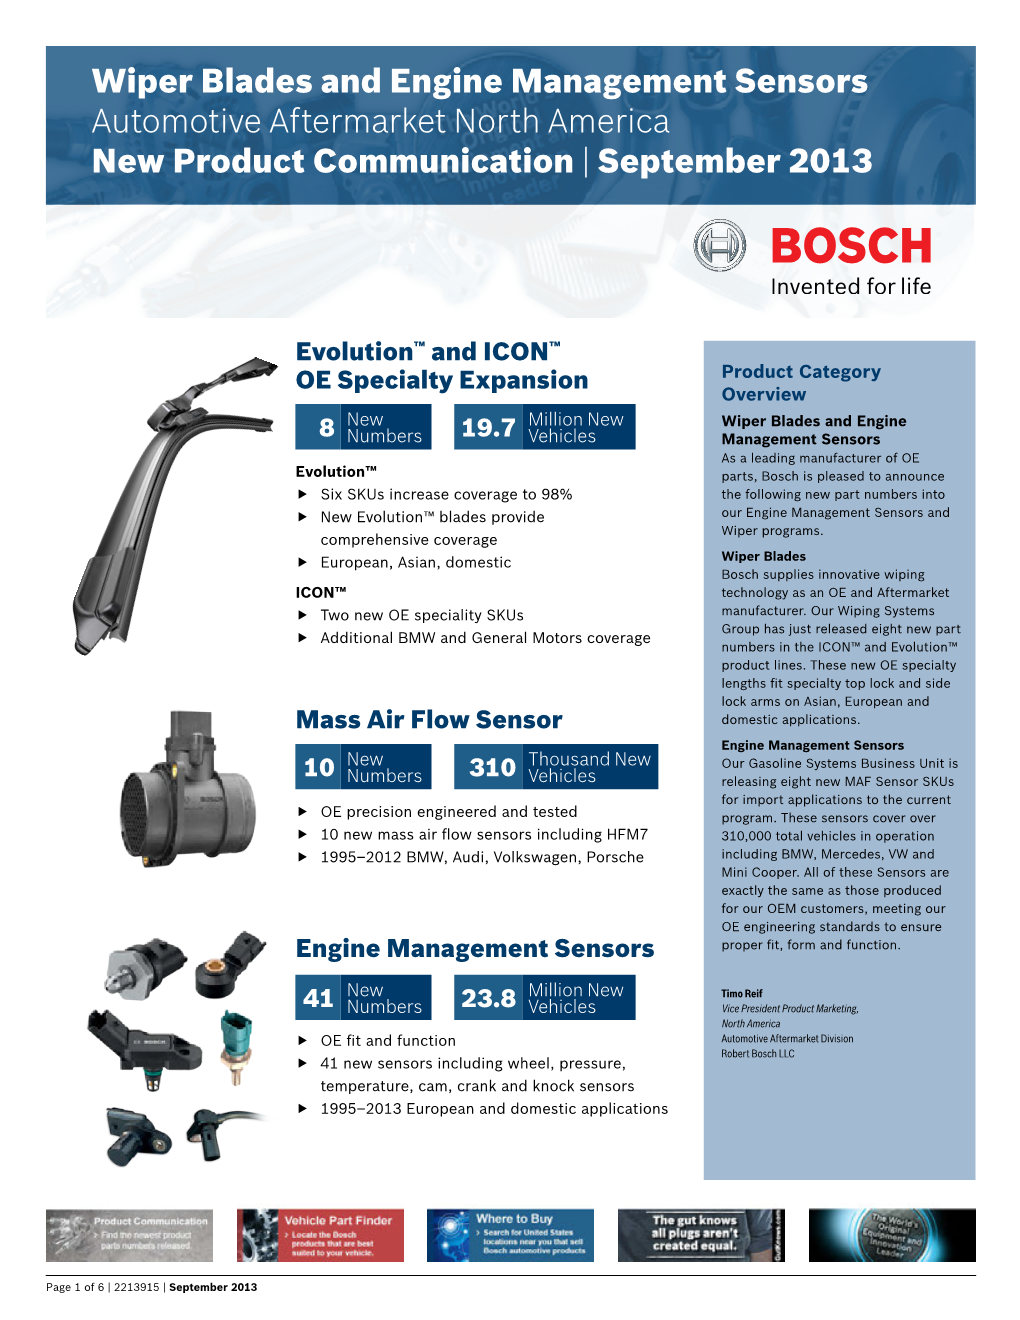 Wiper Blades and Engine Management Sensors Automotive Aftermarket North America New Product Communication | September 2013